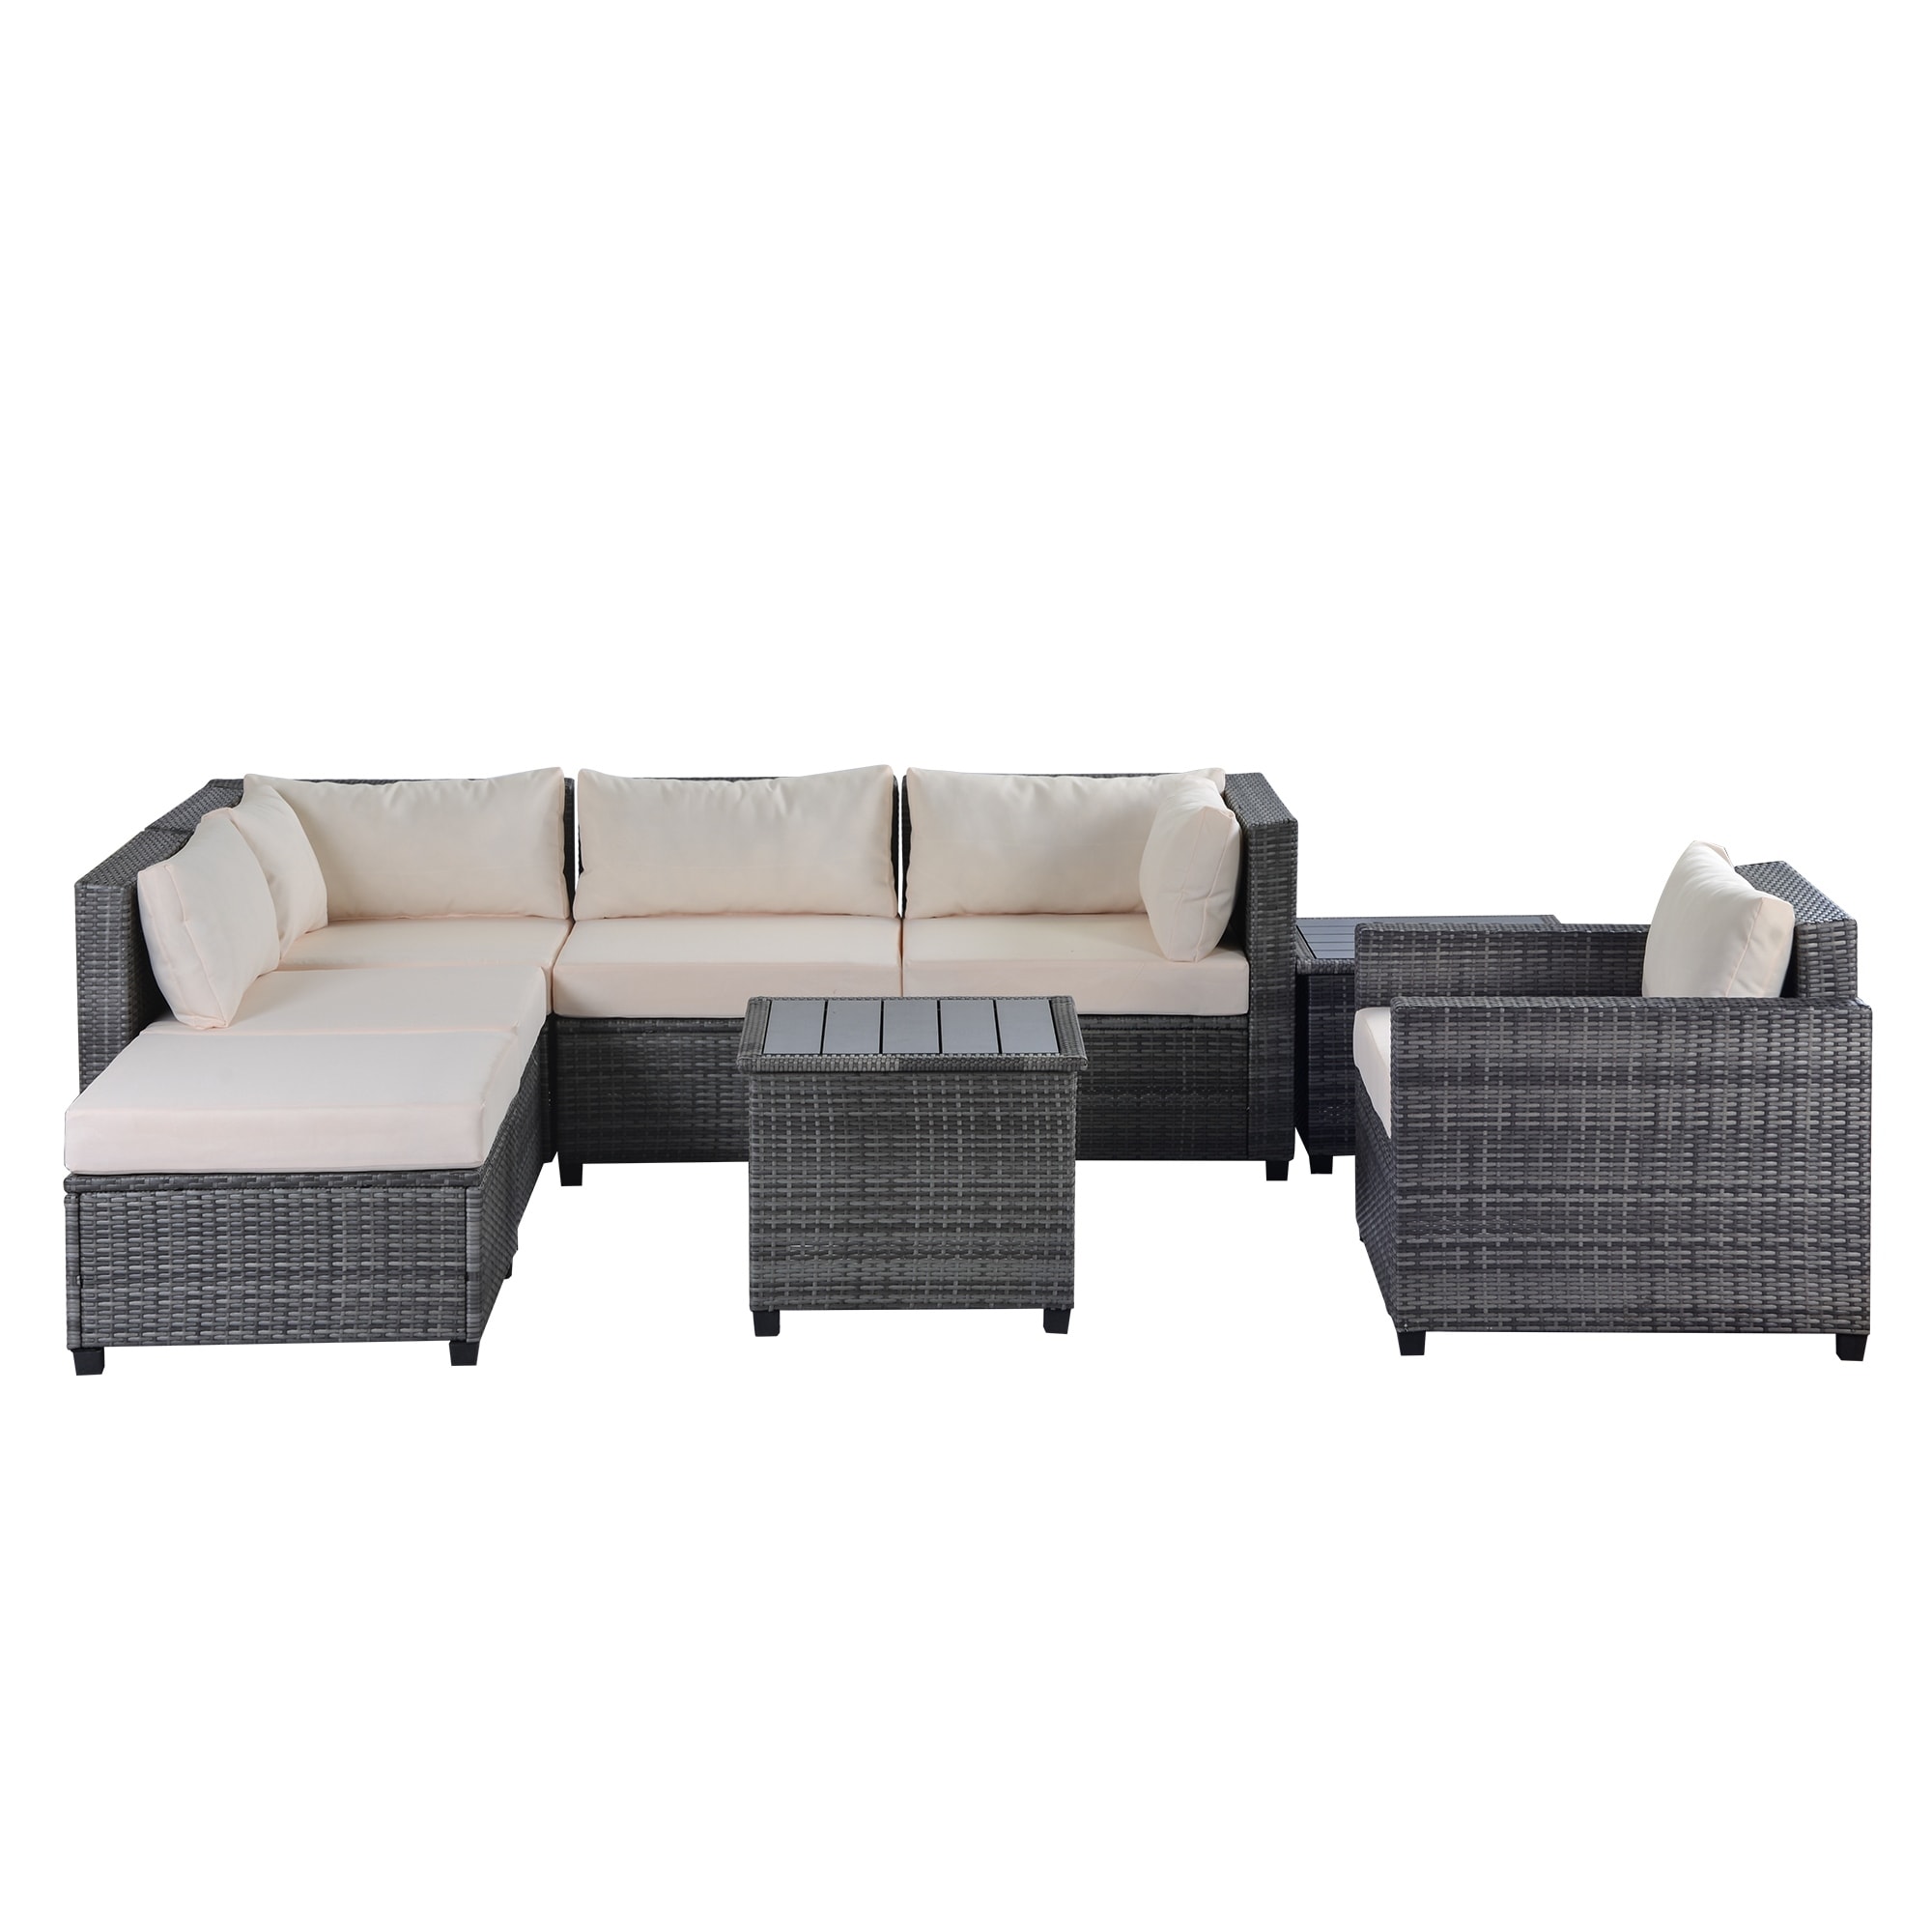 8 Piece Rattan Sectional Seating Group With Cushions  Patio Furniture Sets  Outdoor Wicker Sectional